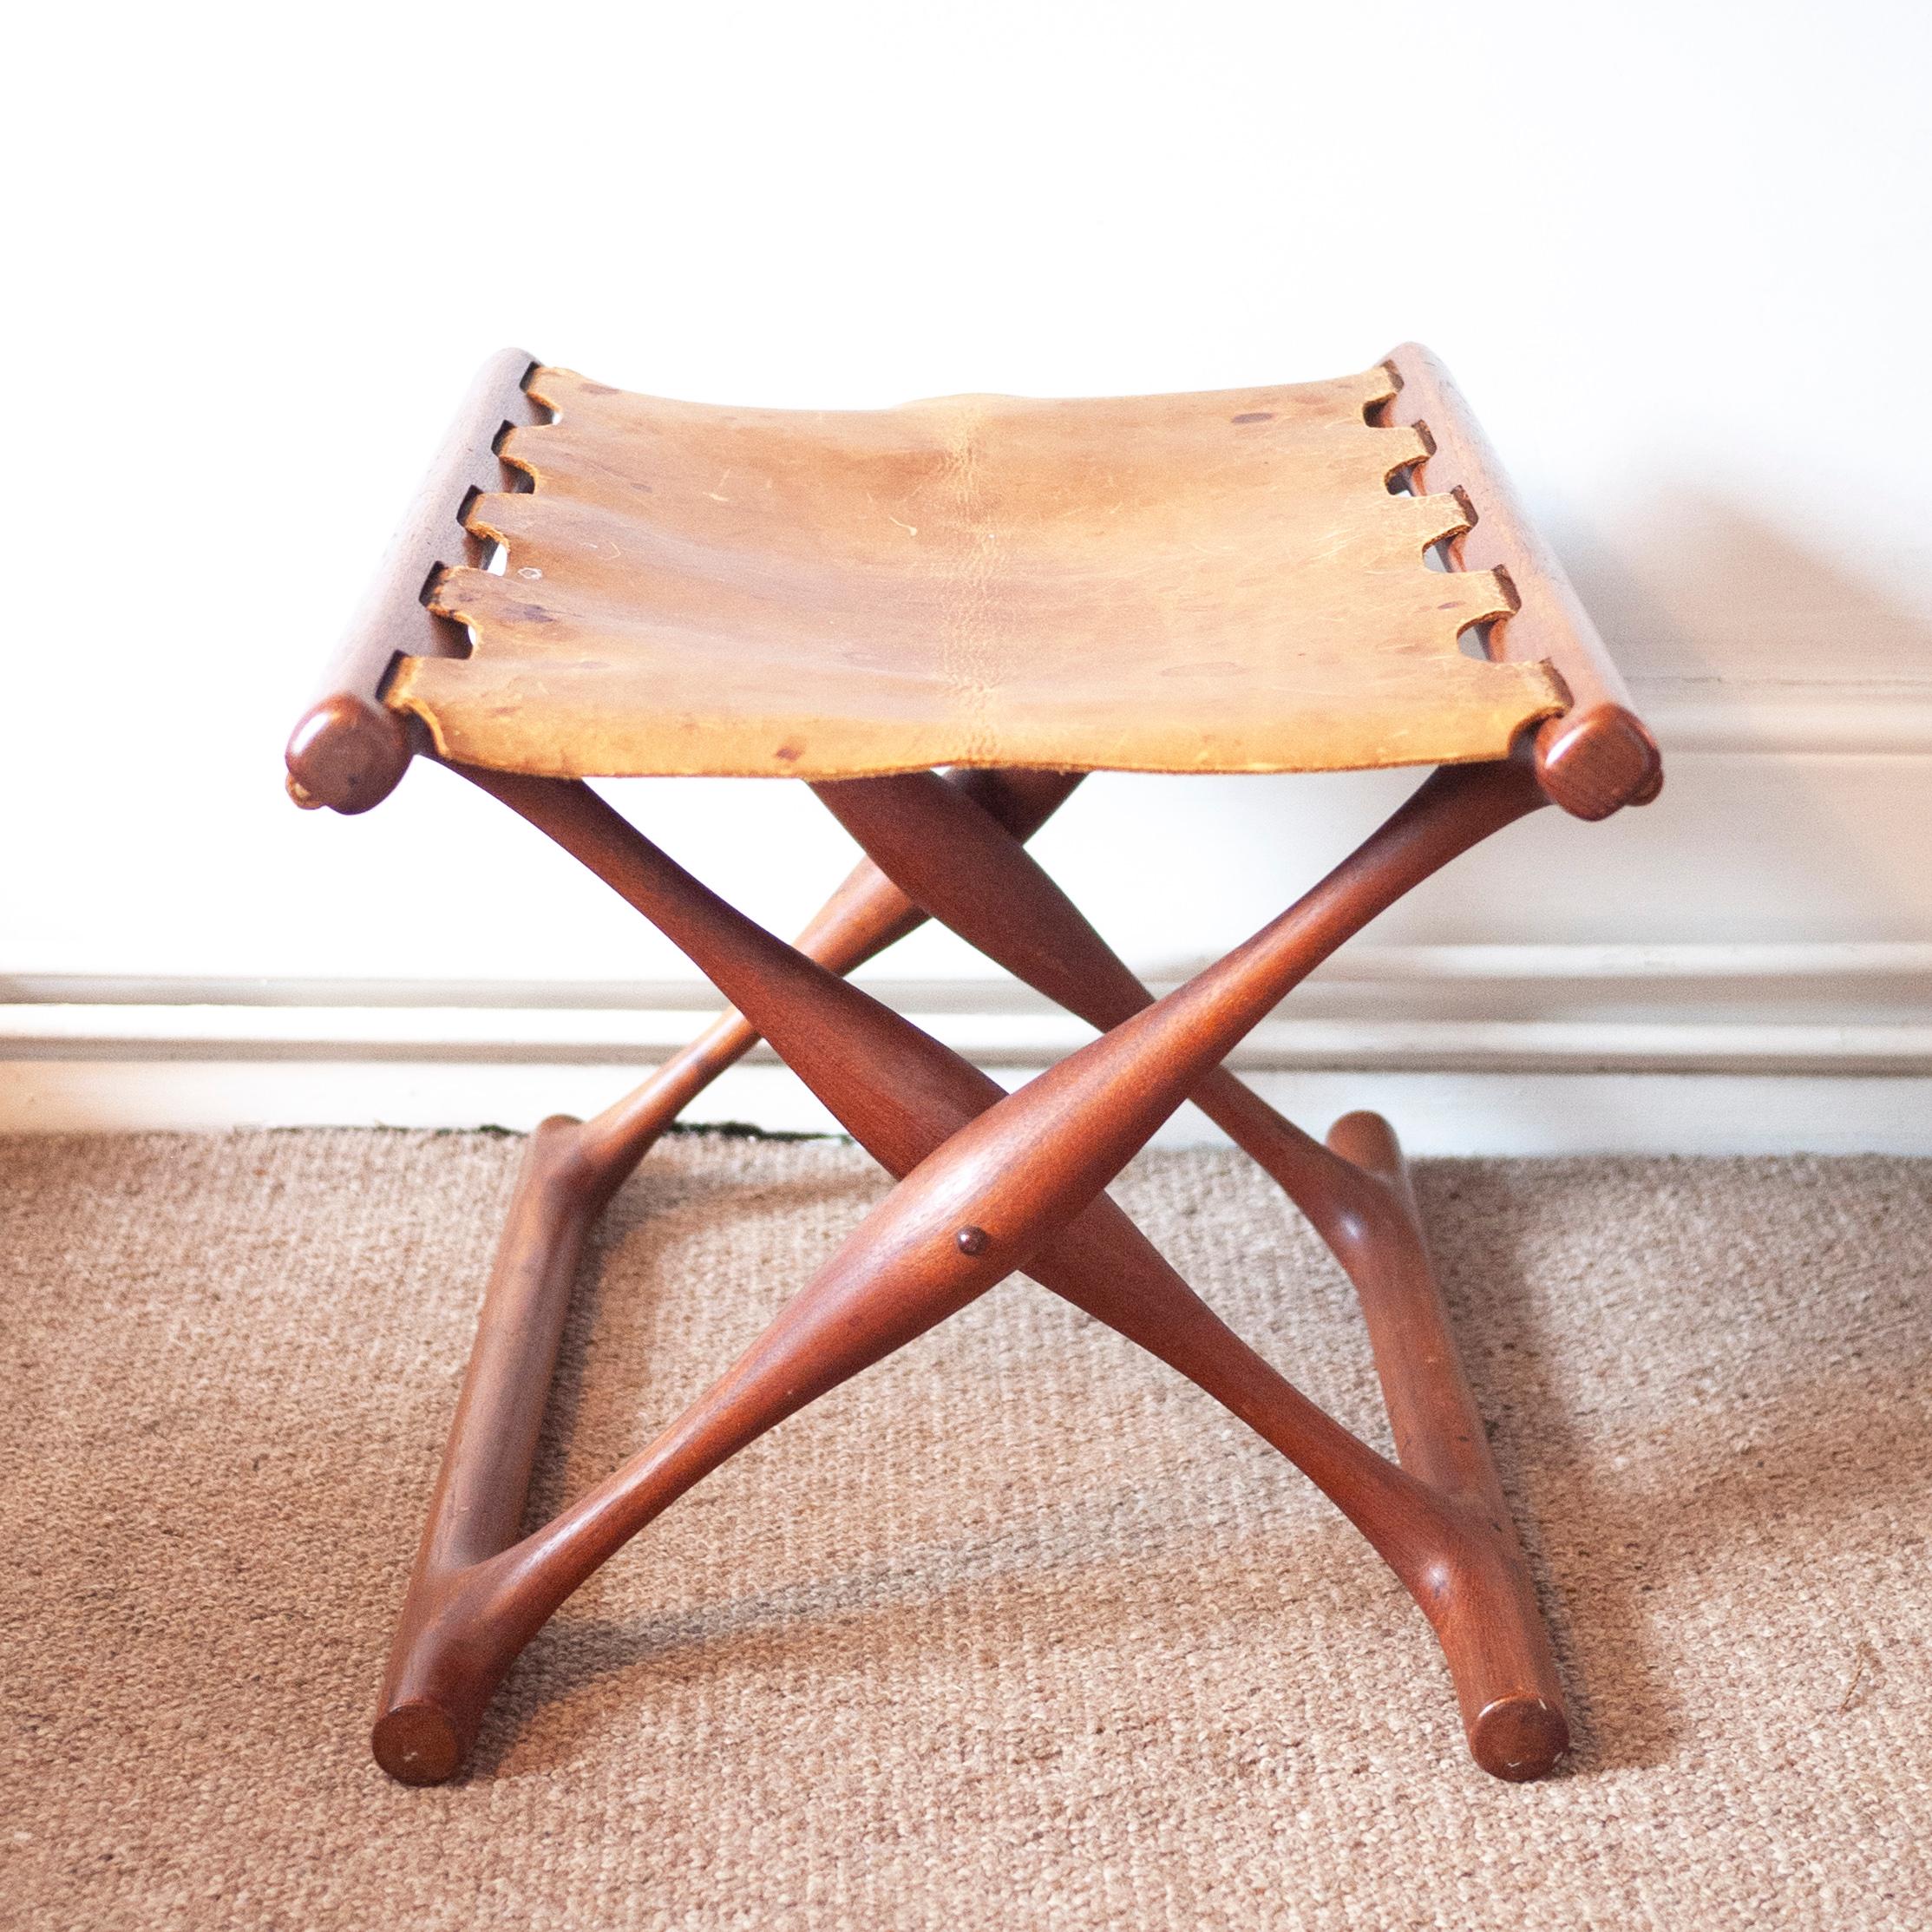 Model 41 folding stool in teak with original, patinated cognac brown saddle leather seat. 

Designer - Poul Hundevad

Period - 1950 to 1959

Country of Manufacturer - Denmark

Style - Vintage

Detailed condition - Good in keeping with age